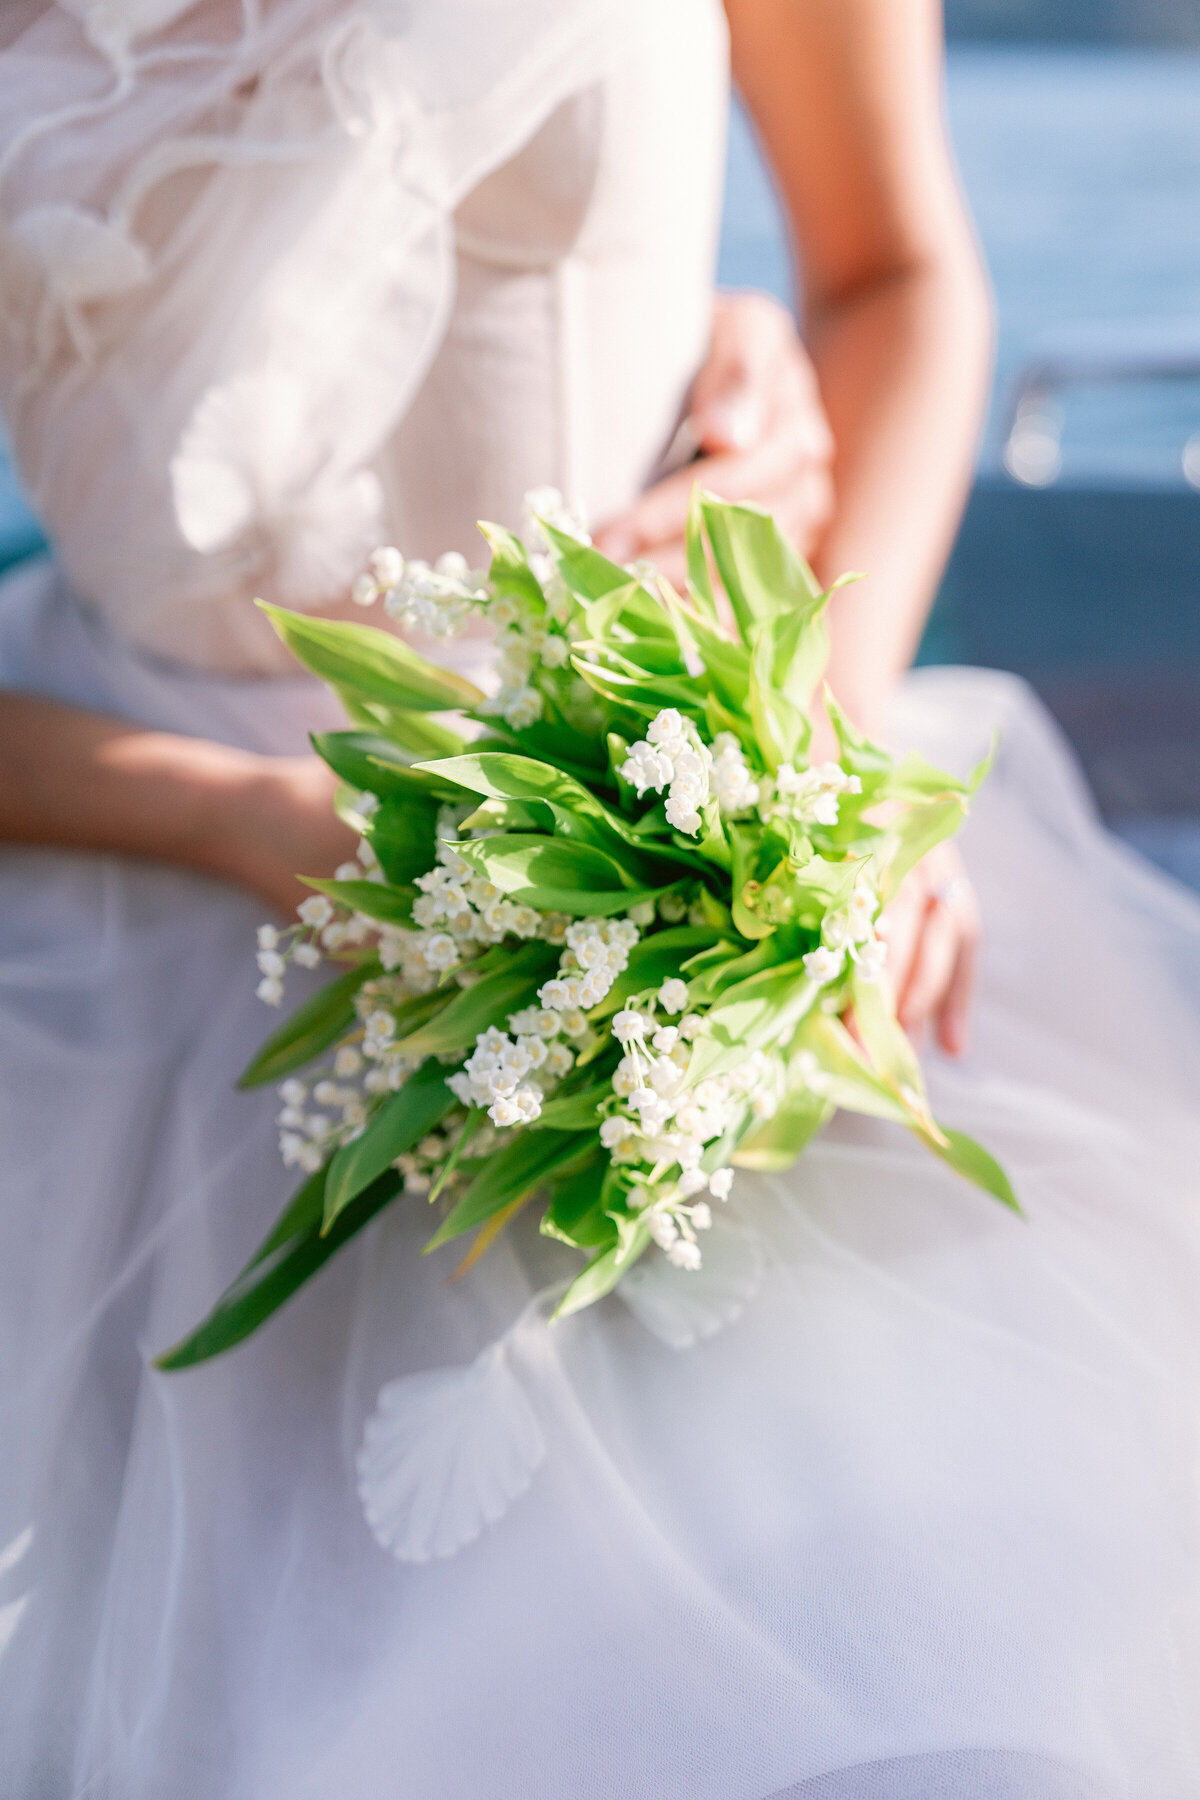 Bride holding small bouquet of white florals with greenery on a private boat on lake como, italy